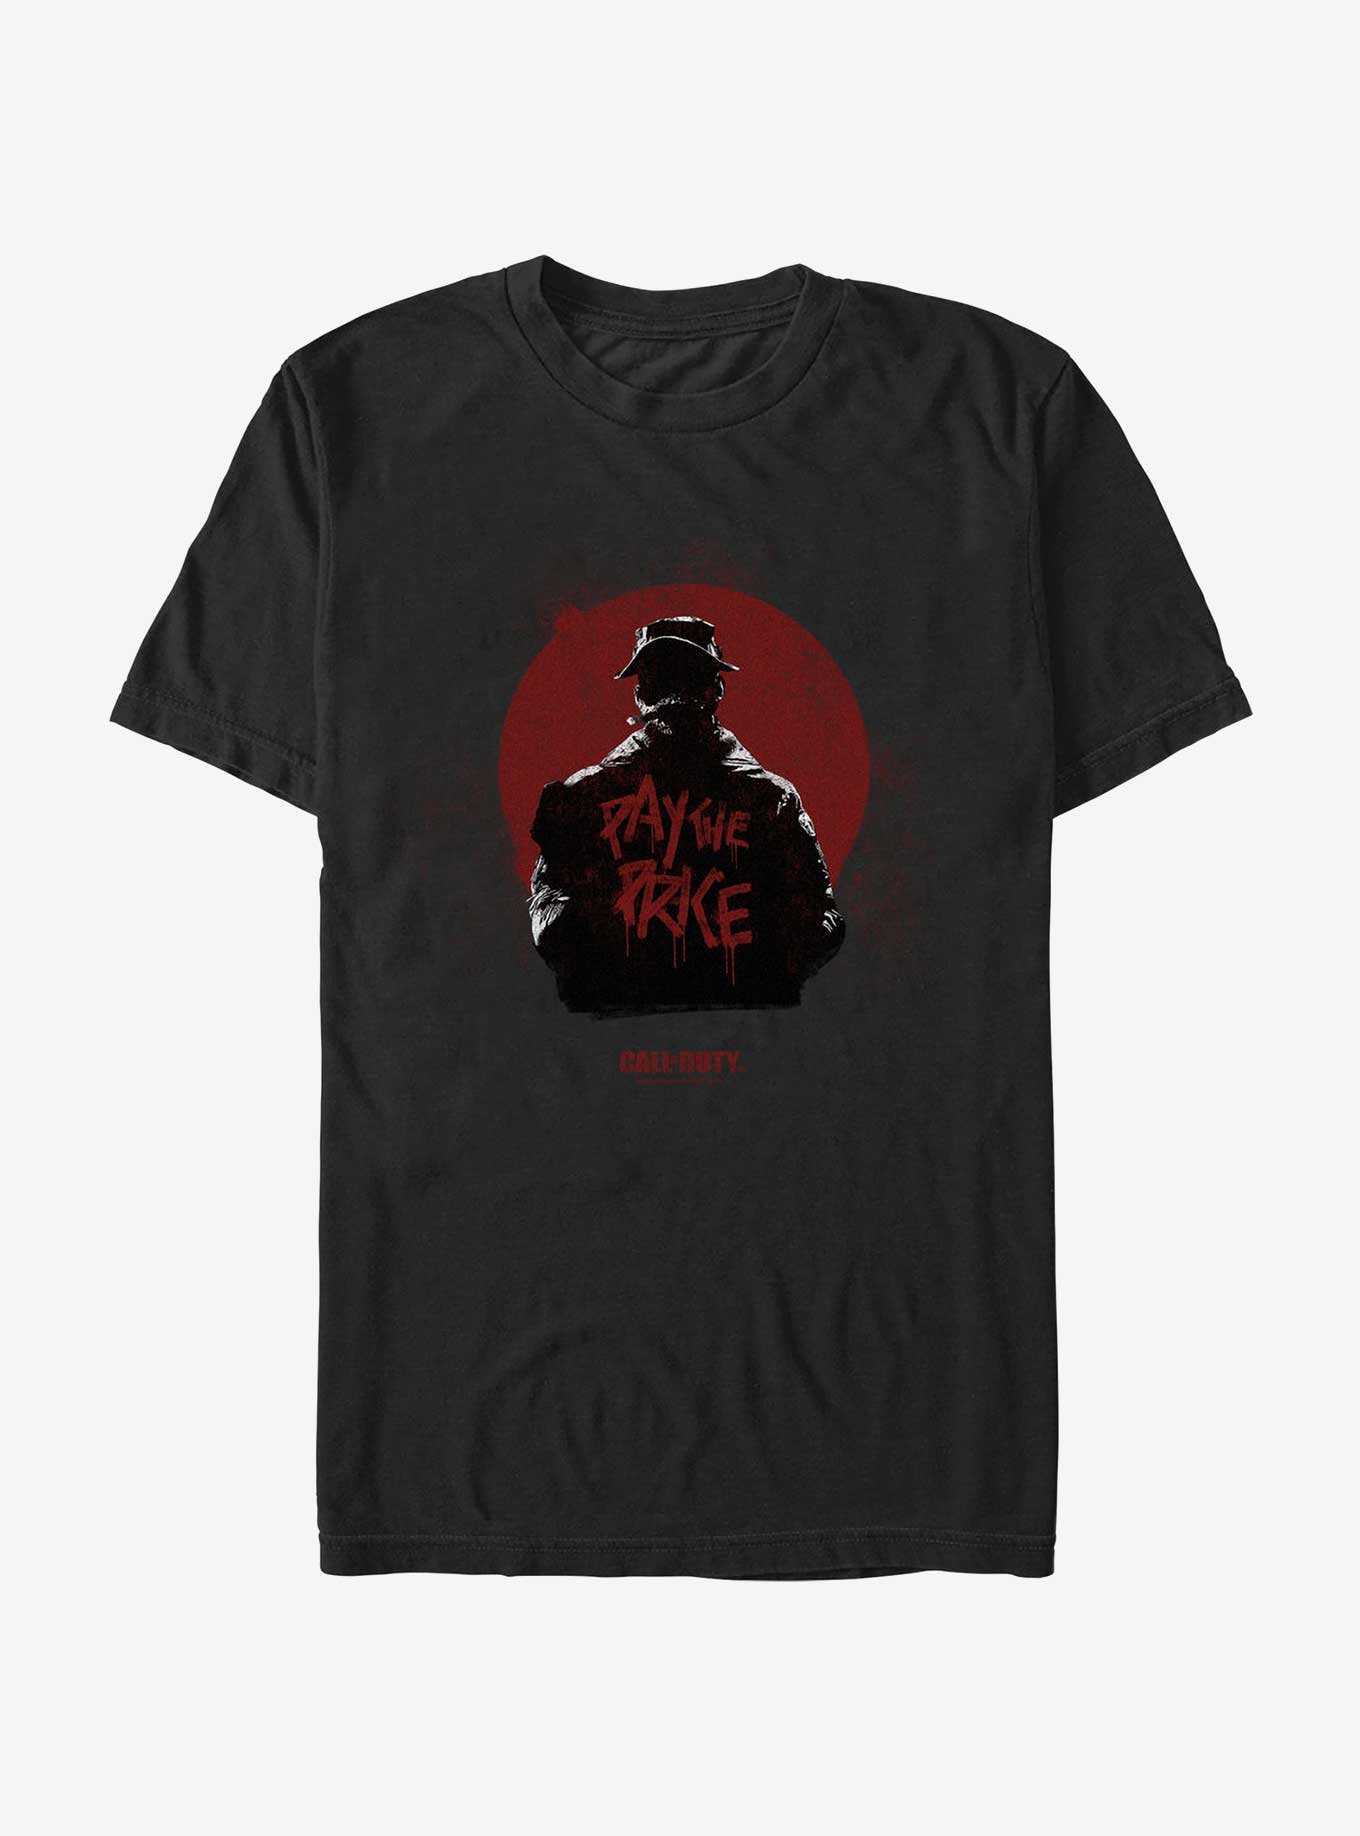 Call of Duty Blood Moon Pay The Price T-Shirt, , hi-res